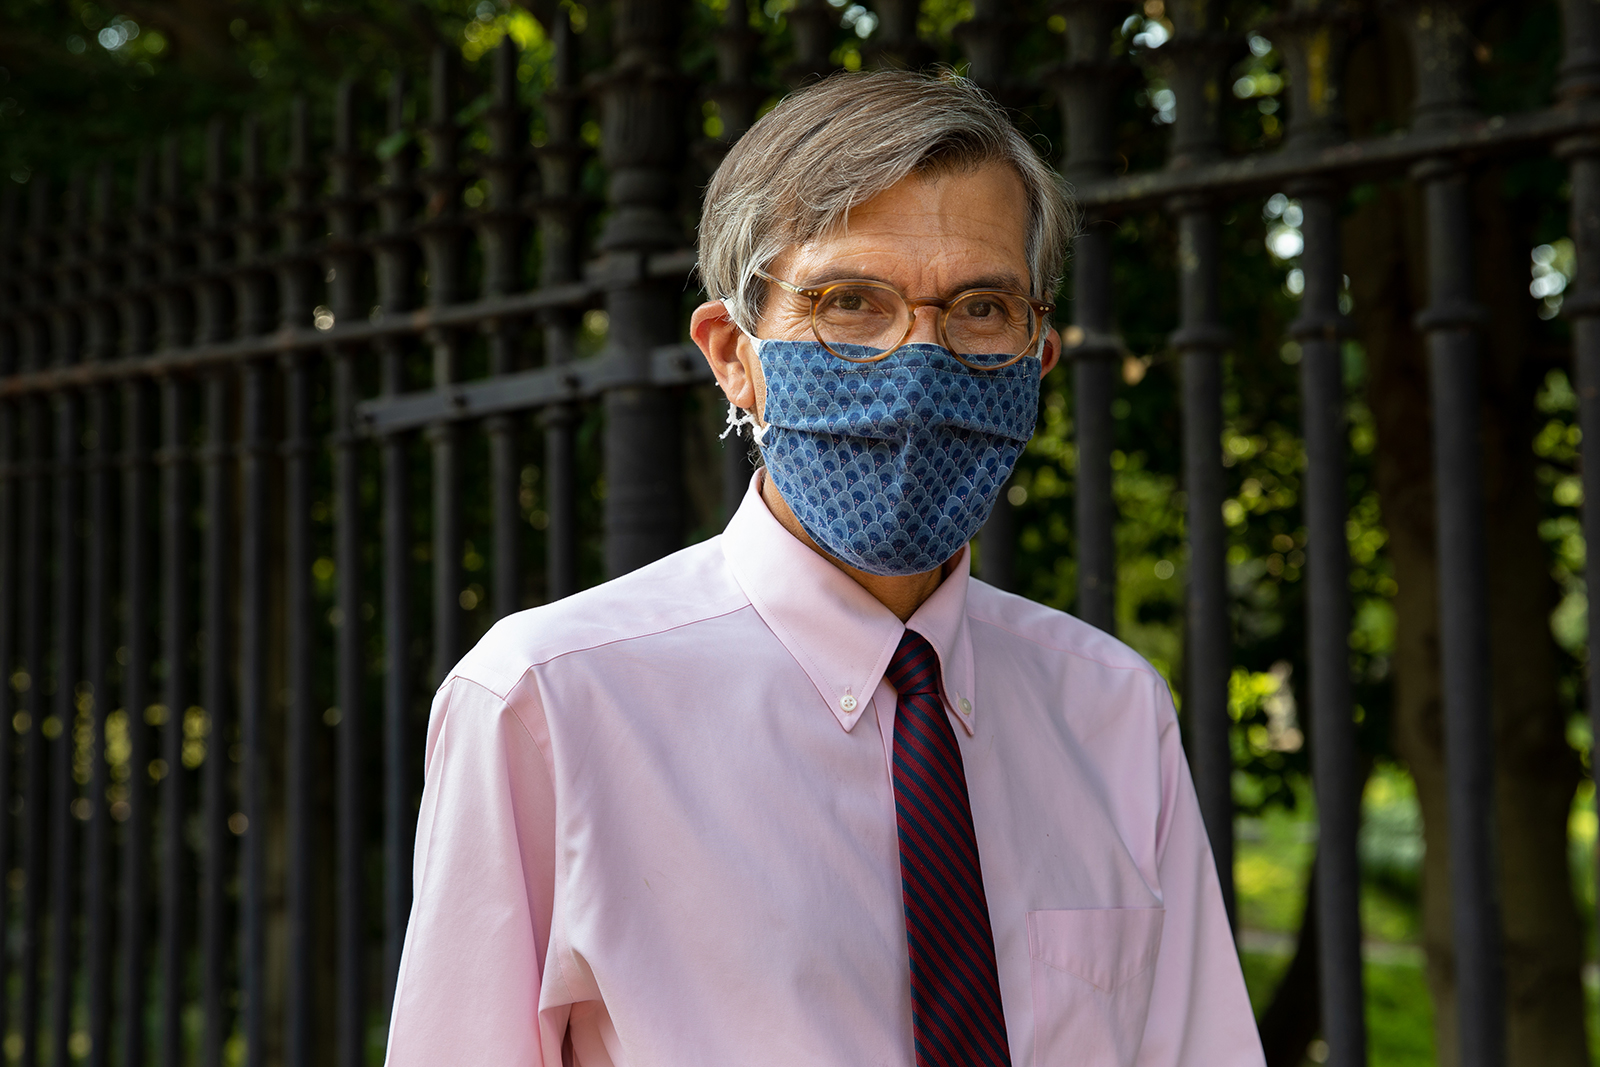 Dr. Peter Marks, the director of the Center for Biologics Evaluation and Research (CBER) at the Food and Drug Administration, poses for a portrait near his home in Washington, DC on August 5.